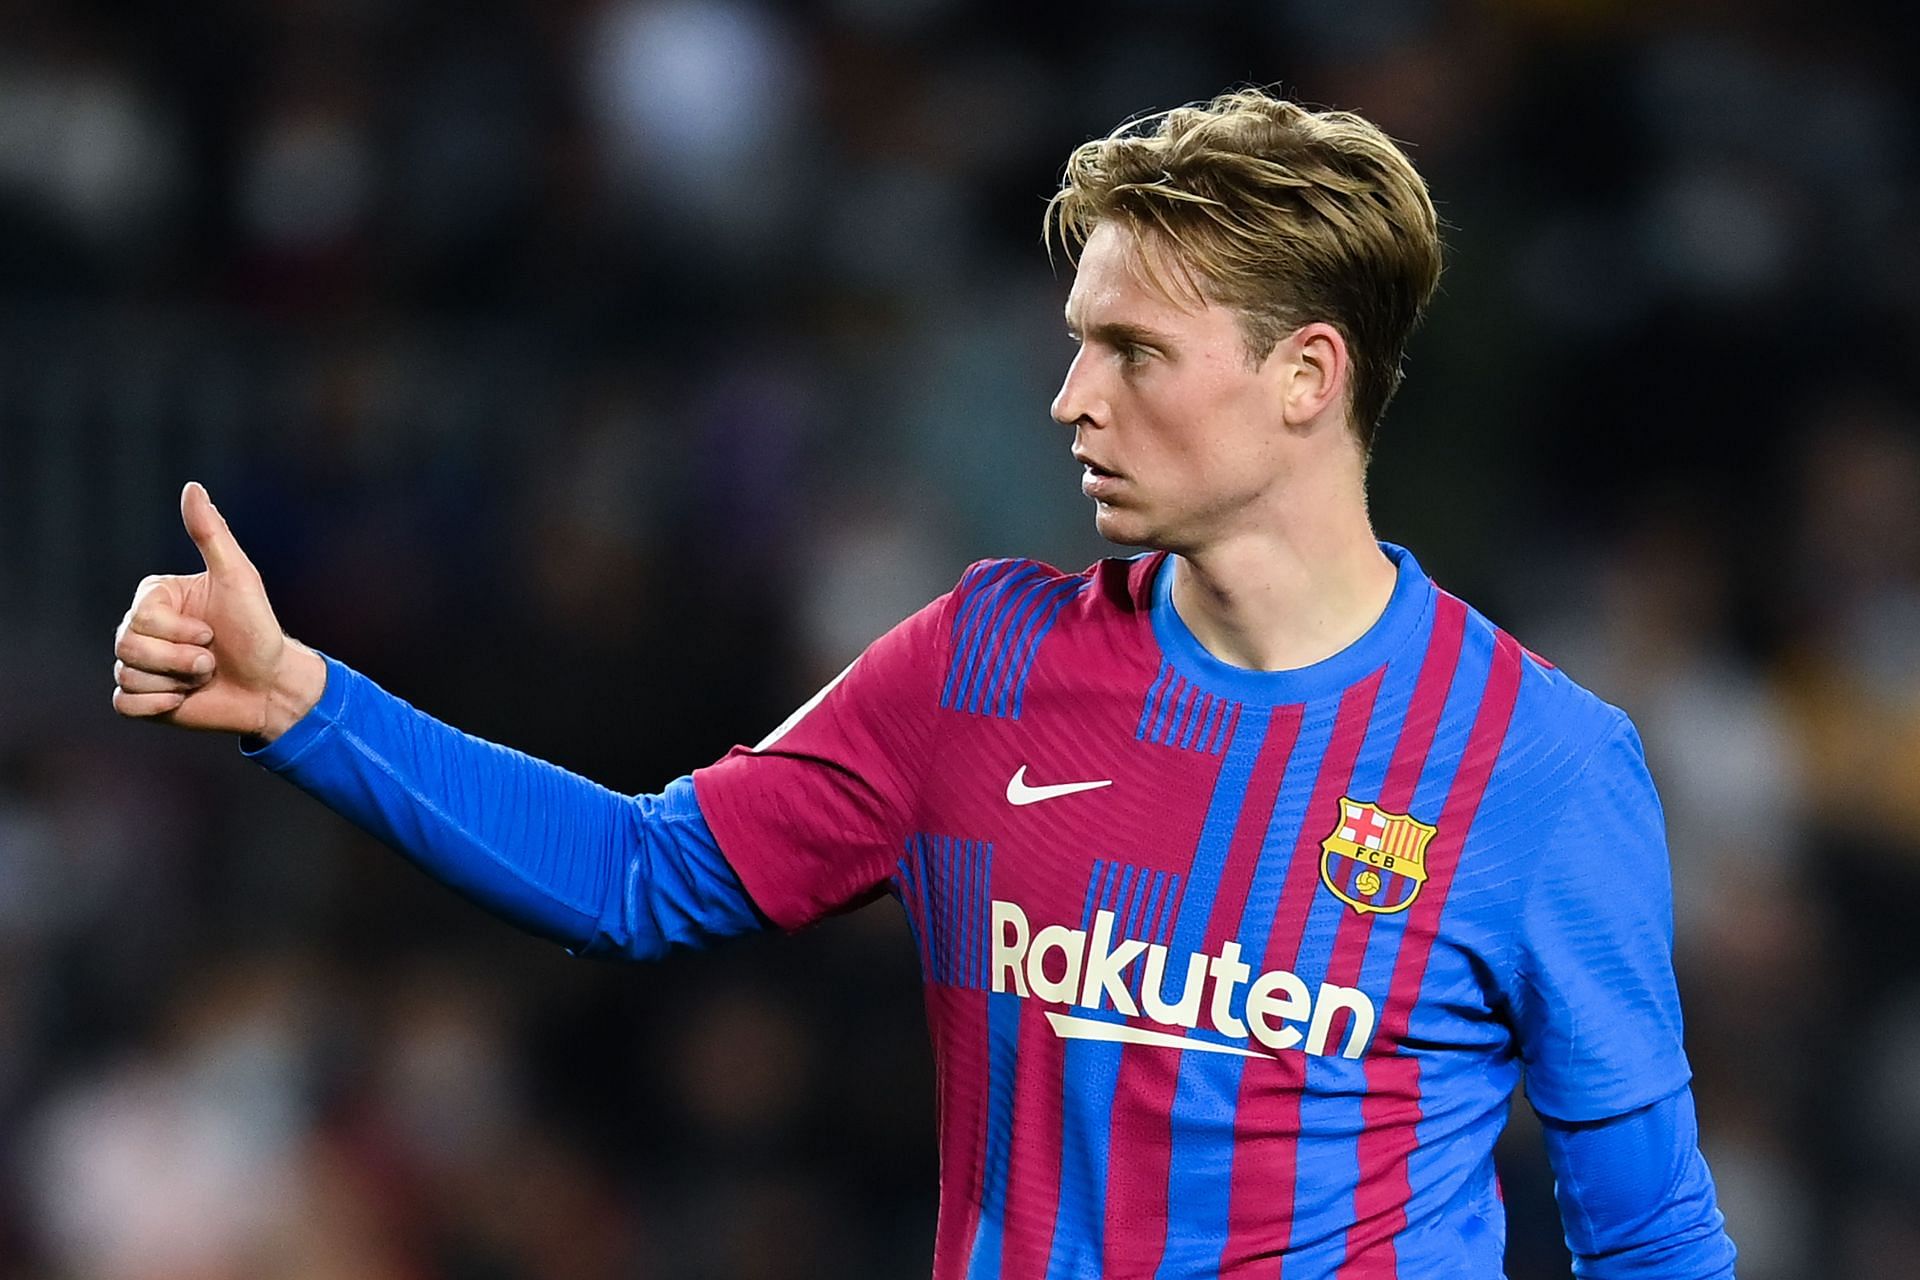 Arsenal legend Kevin Campbell has urged his former club to sign Frenkie de Jong.